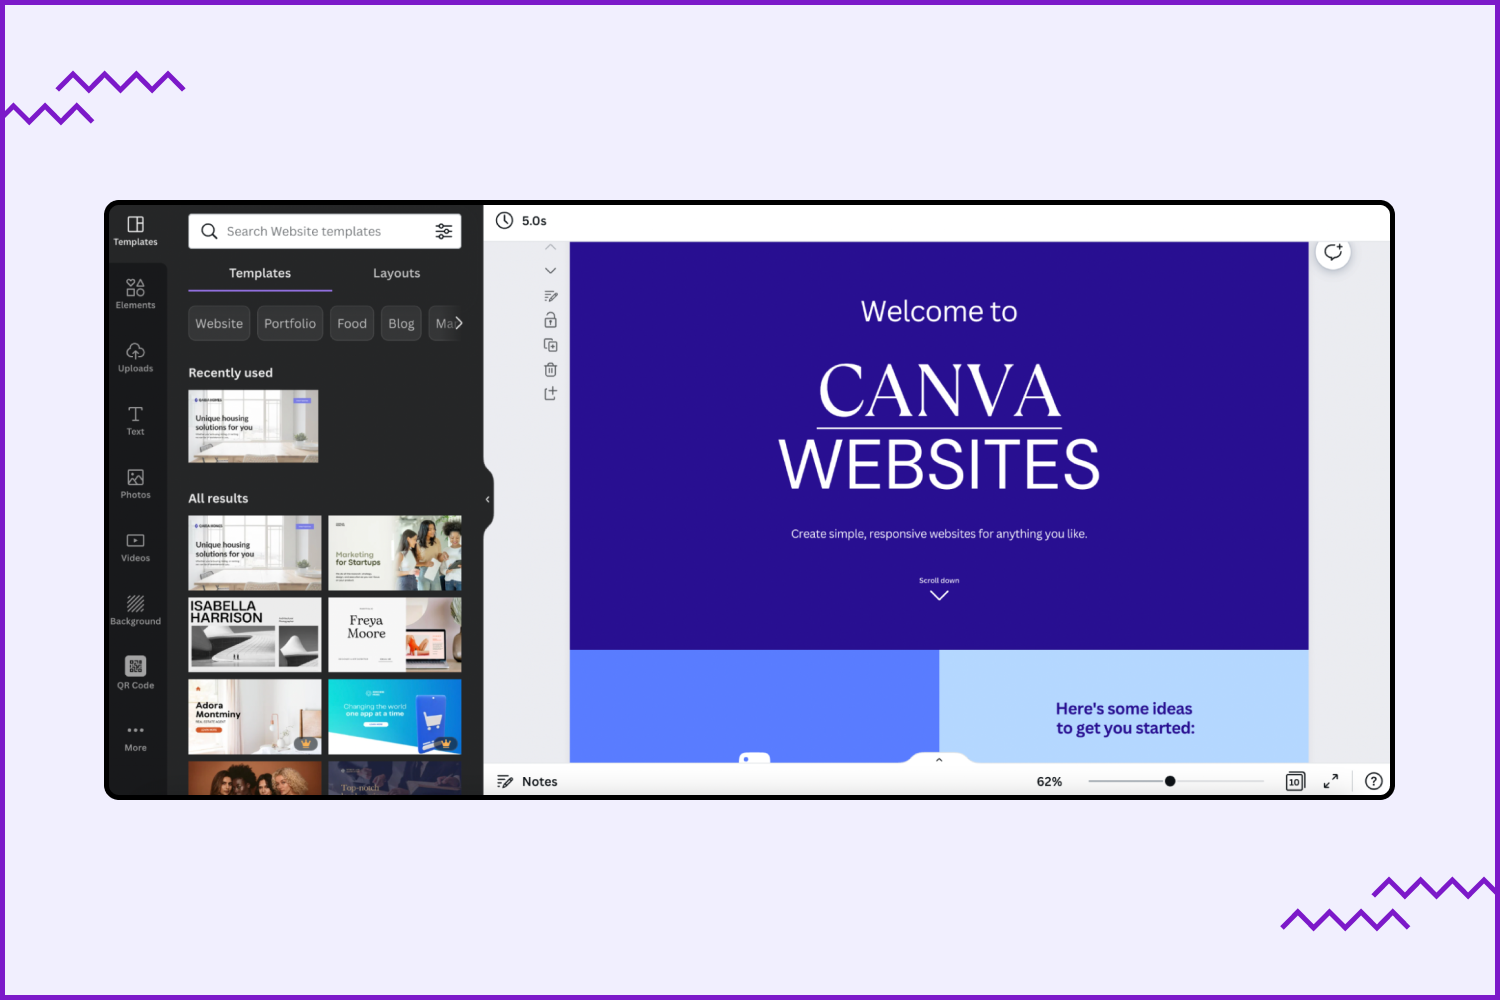 Screenshot of the Website's page in Canva.